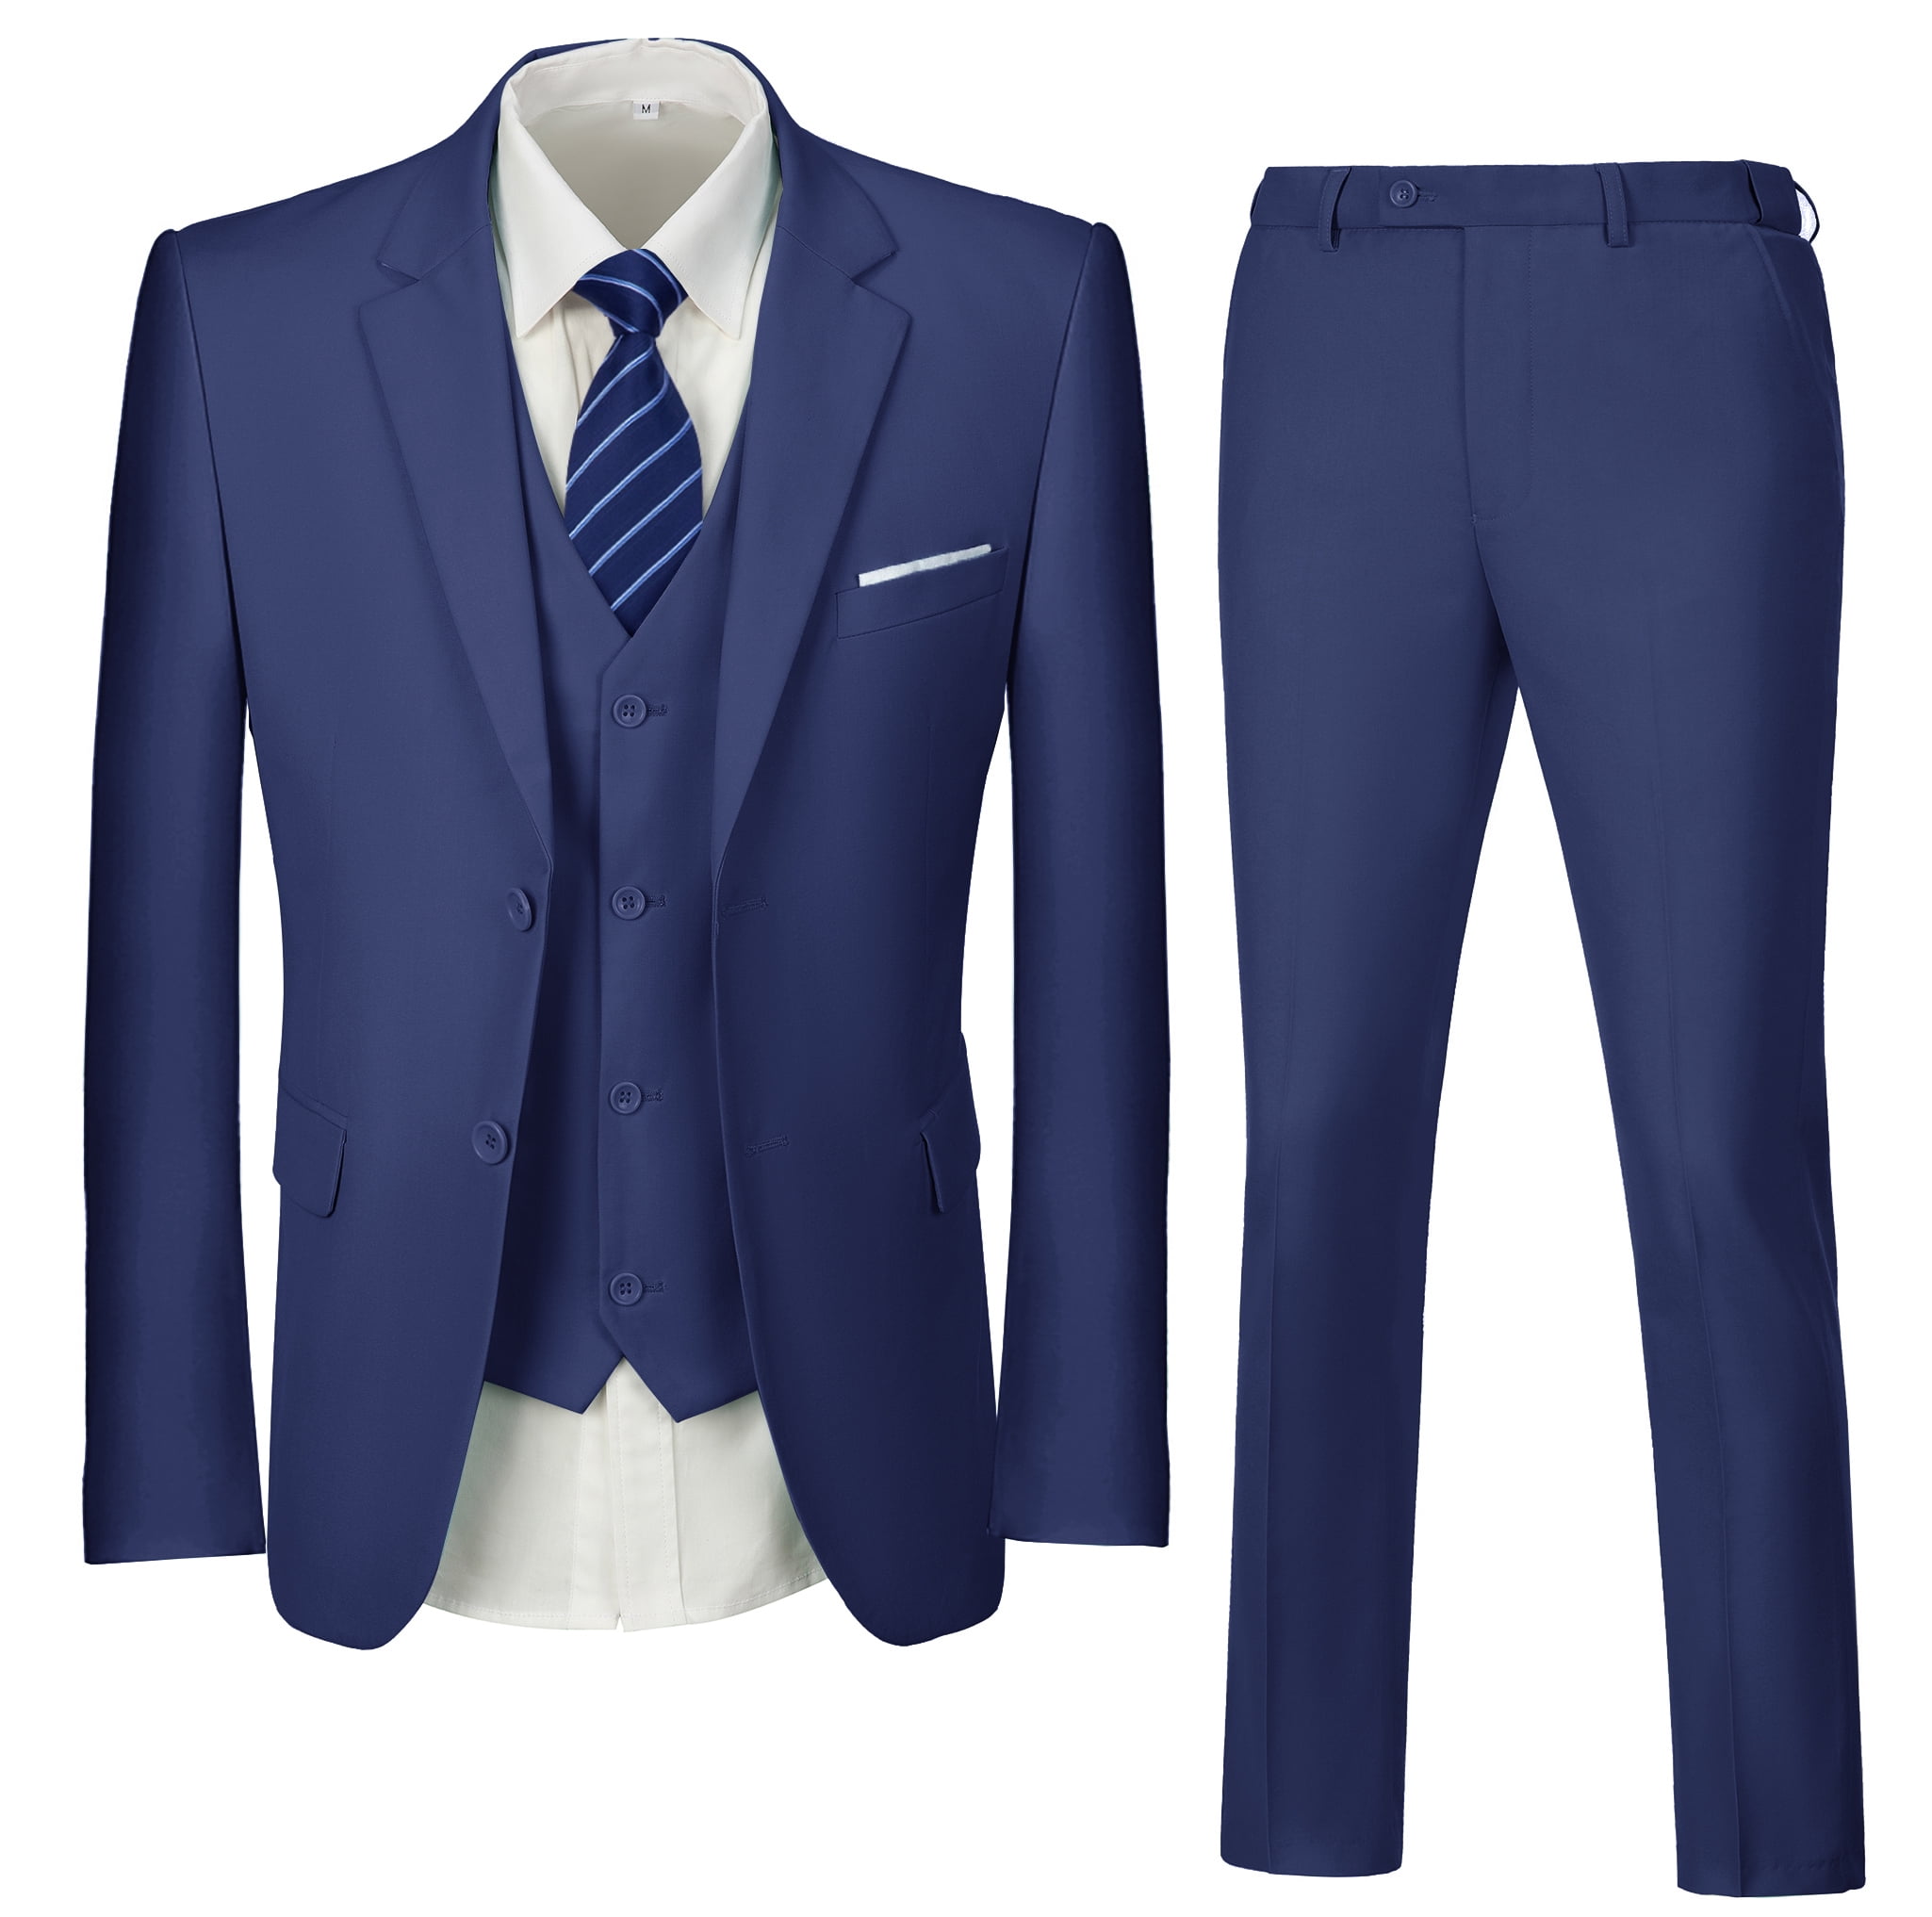 Custom Made Korean Slim Fit Formal Suit Set For Men Perfect For Weddings  And Casual Events Ccoat Included From Beatricl, $14.45 | DHgate.Com